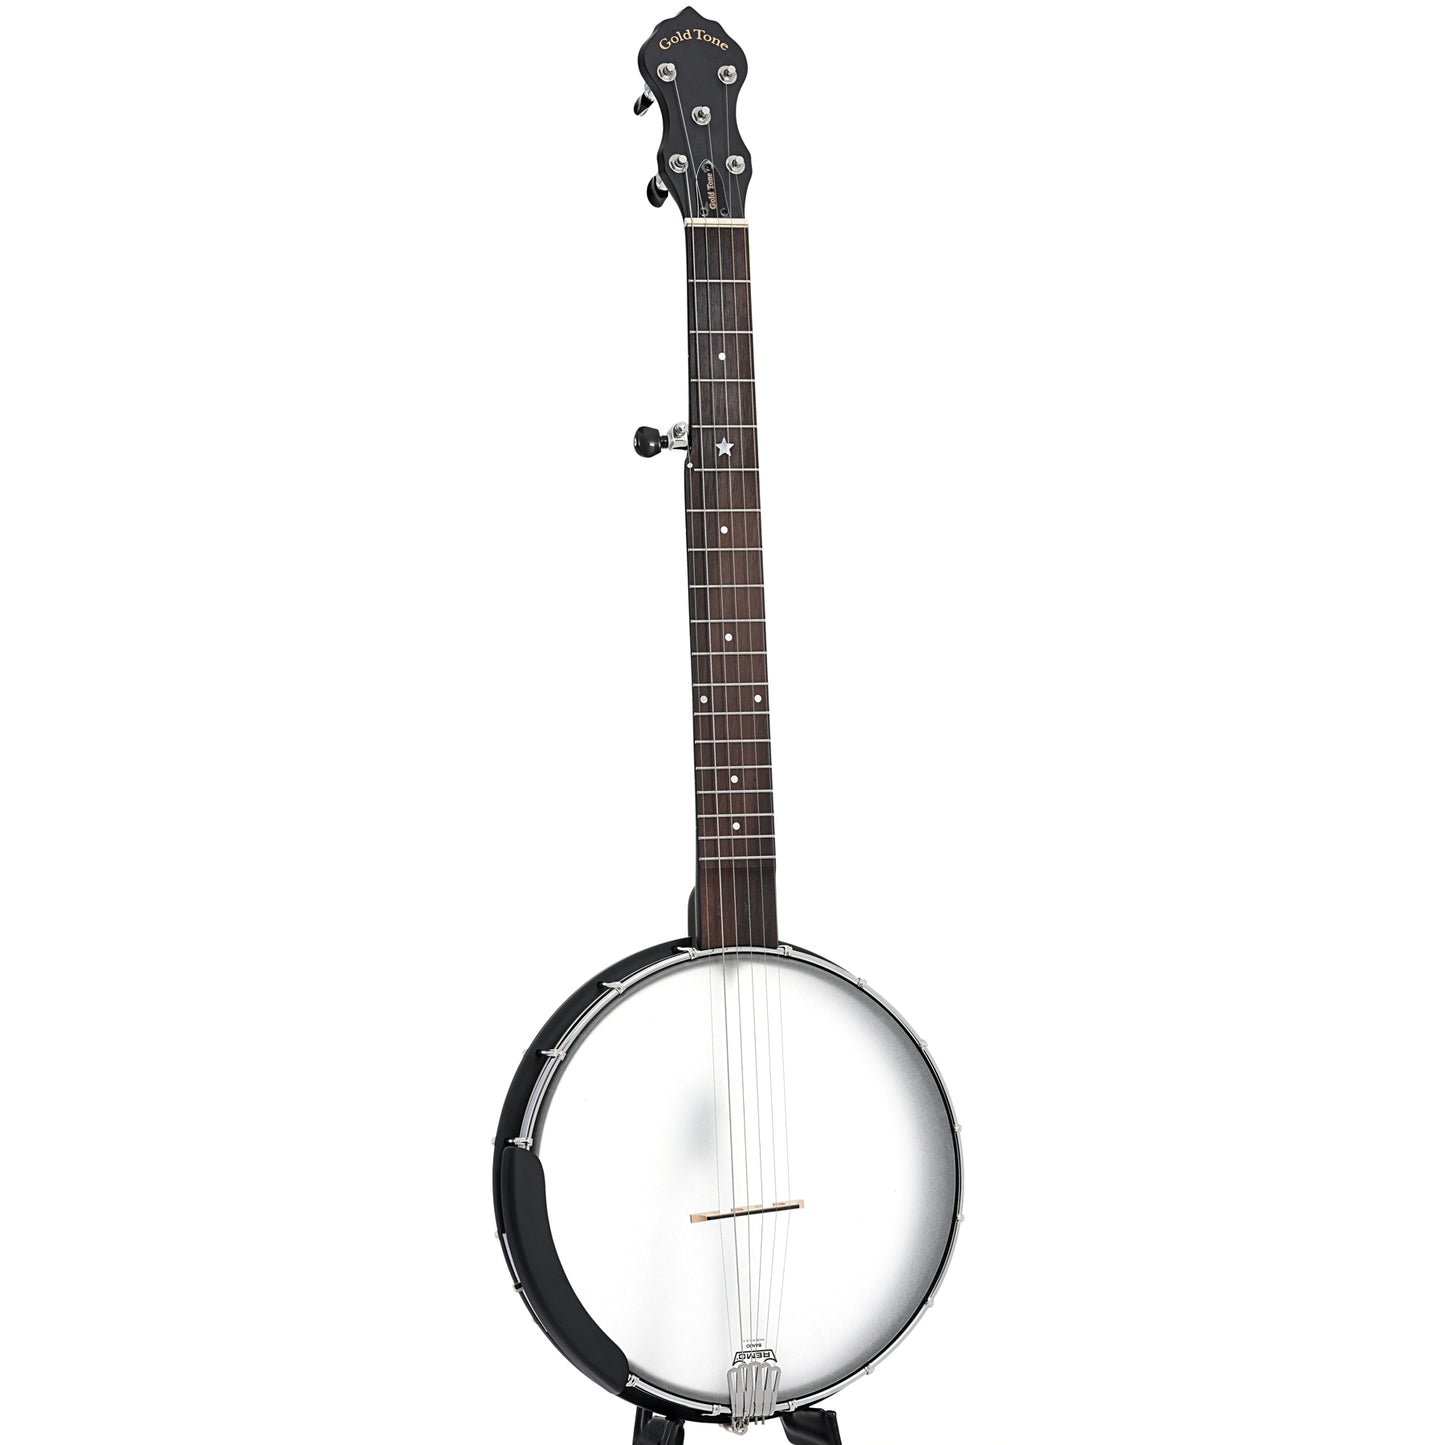 Full front and side of Gold Tone AC-5+1S "Lojo" Openback Banjo 